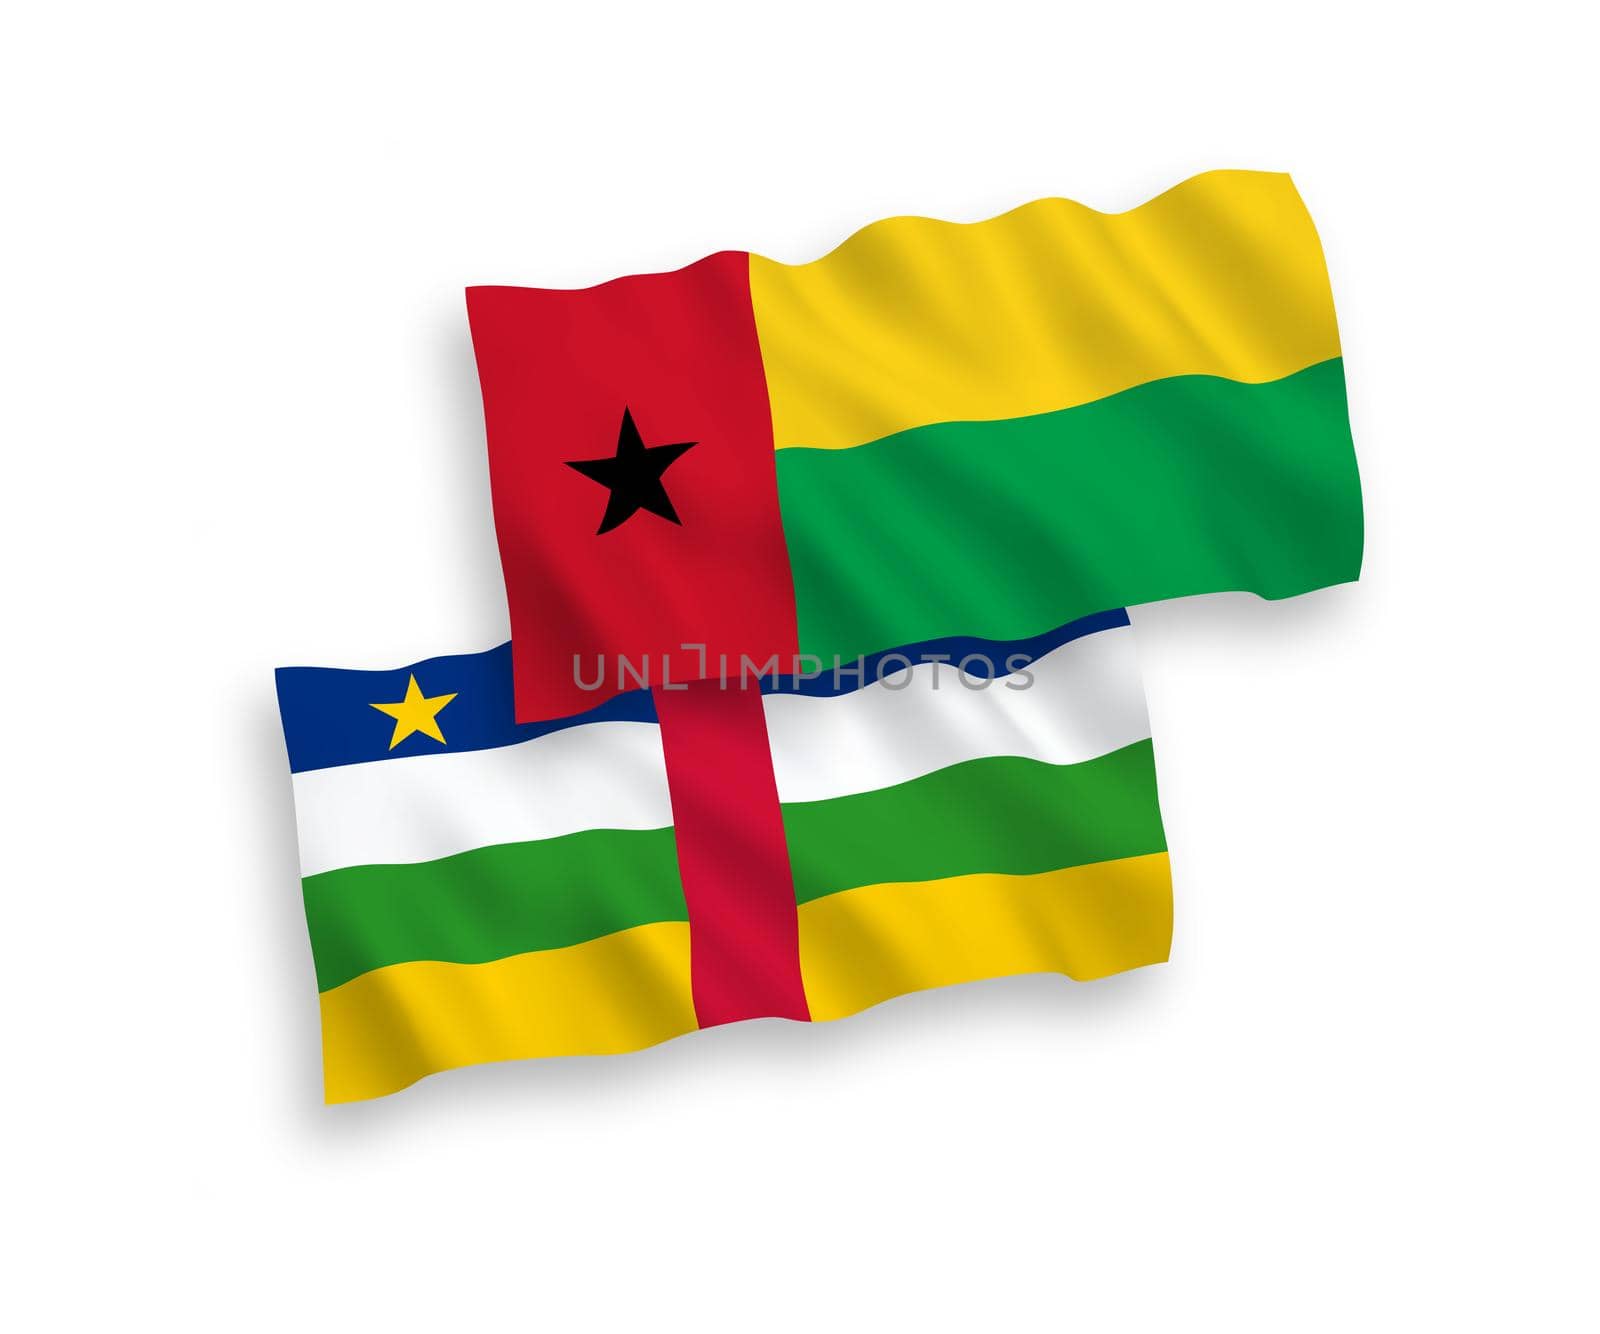 Flags of Central African Republic and Republic of Guinea Bissau on a white background by epic33